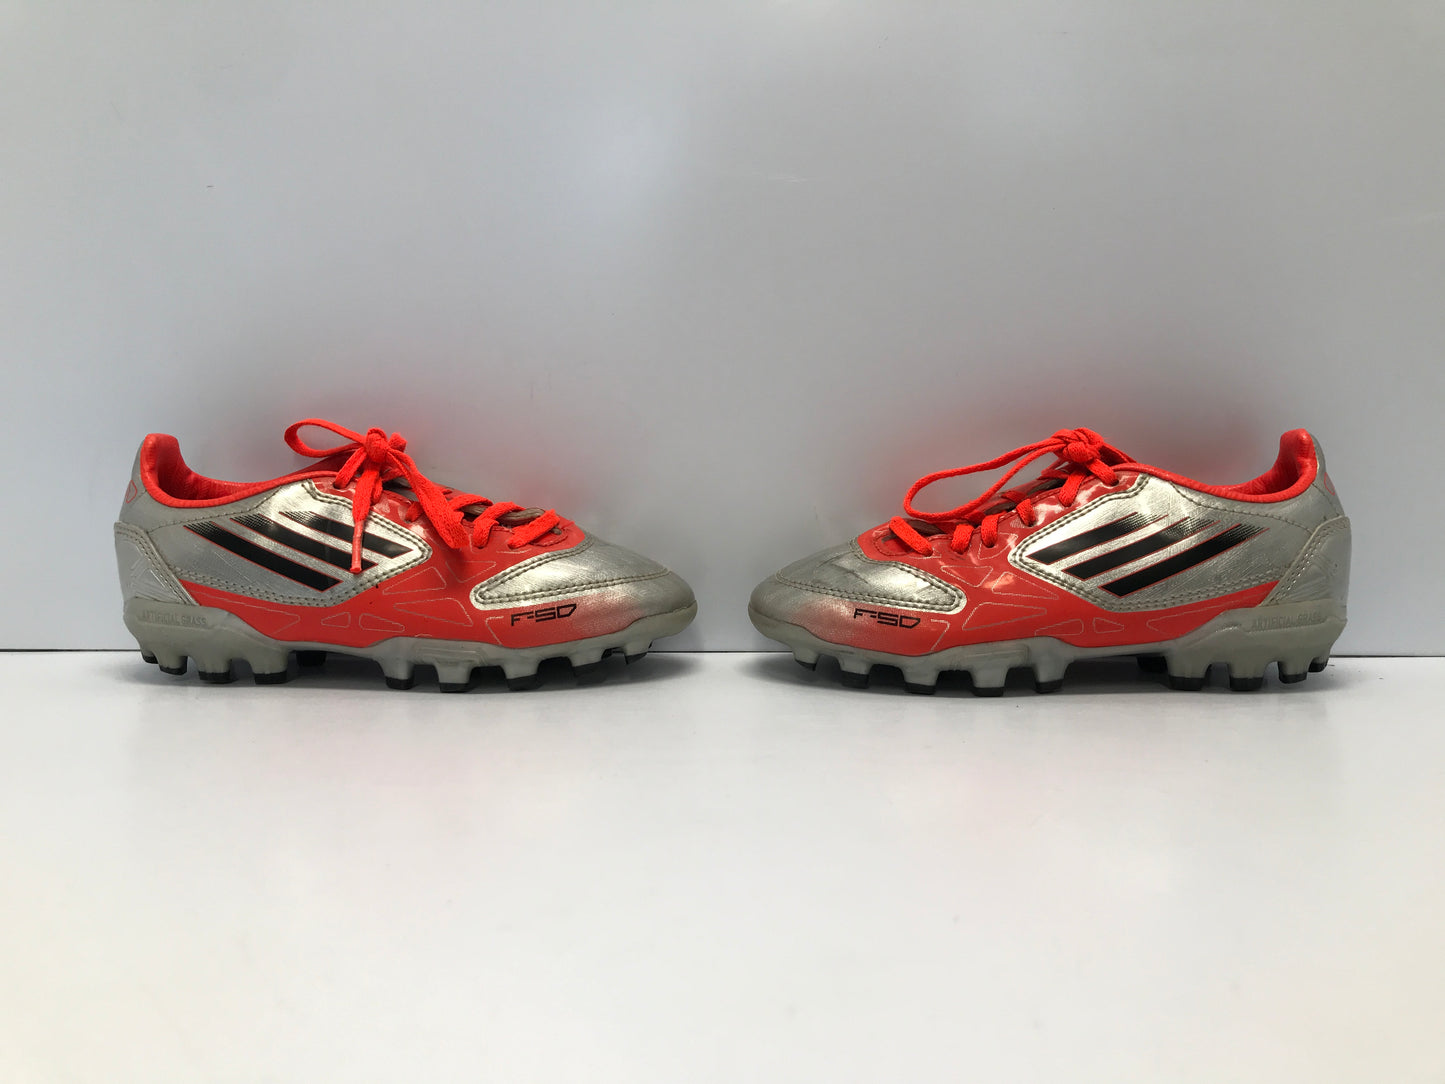 Soccer Shoes Cleats Child Size 13 Adidas Silver Tangerine